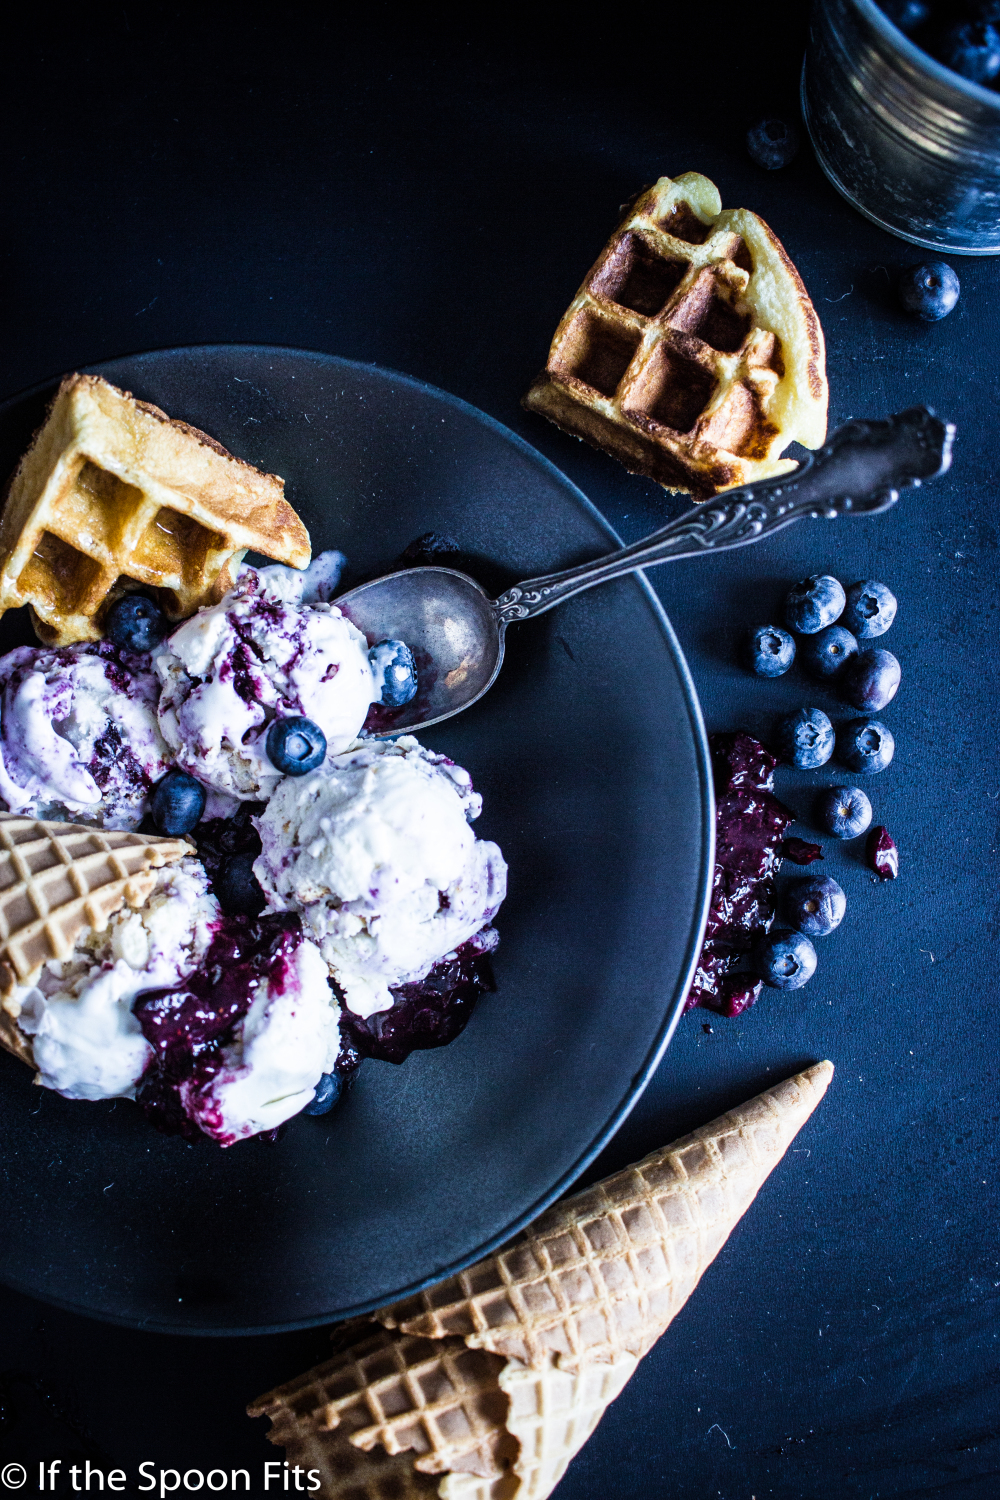 Belgian Buttermilk Waffle Ice Cream with Sweet Blueberry Compote. Photo by ©If the Spoons Fits.